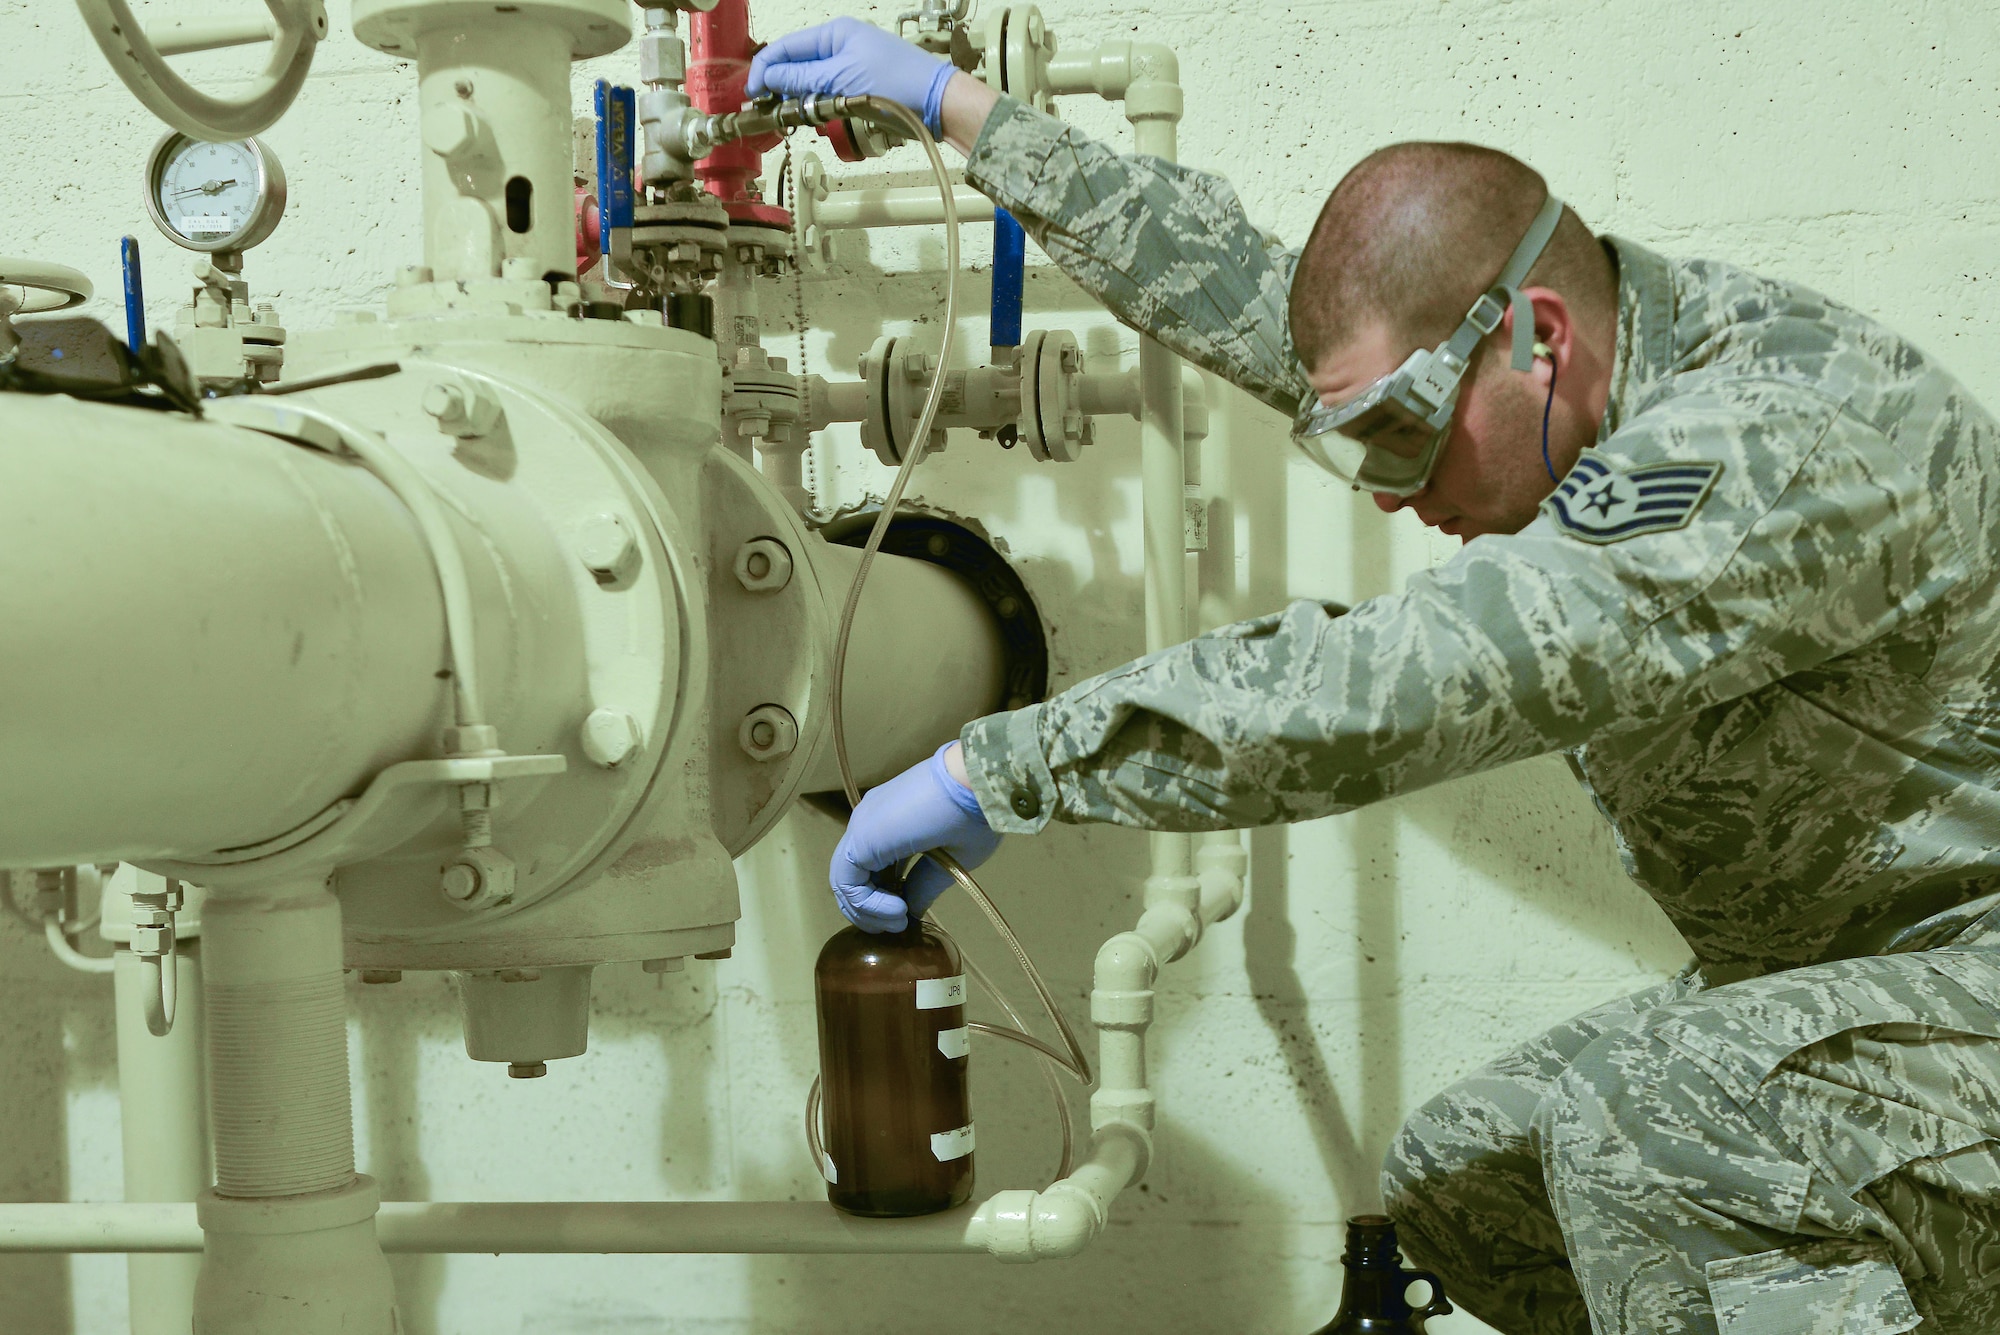 Staff Sgt. David Ramirez, 379th Expeditionary Logistic Readiness fuels laboratory, extracts a sample of jet petroleum 8 from a pipeline which supplies the aircraft here August 19, 2015 at Al Udeid Air Base, Qatar. The base fuels laboratory at Al Udeid tests all petroleum that is used in aircraft, vehicles and generators throughout the installation to safeguard its quality, performance and safety. (U.S. Air Force photo/ Staff Sgt. Alexandre Montes)